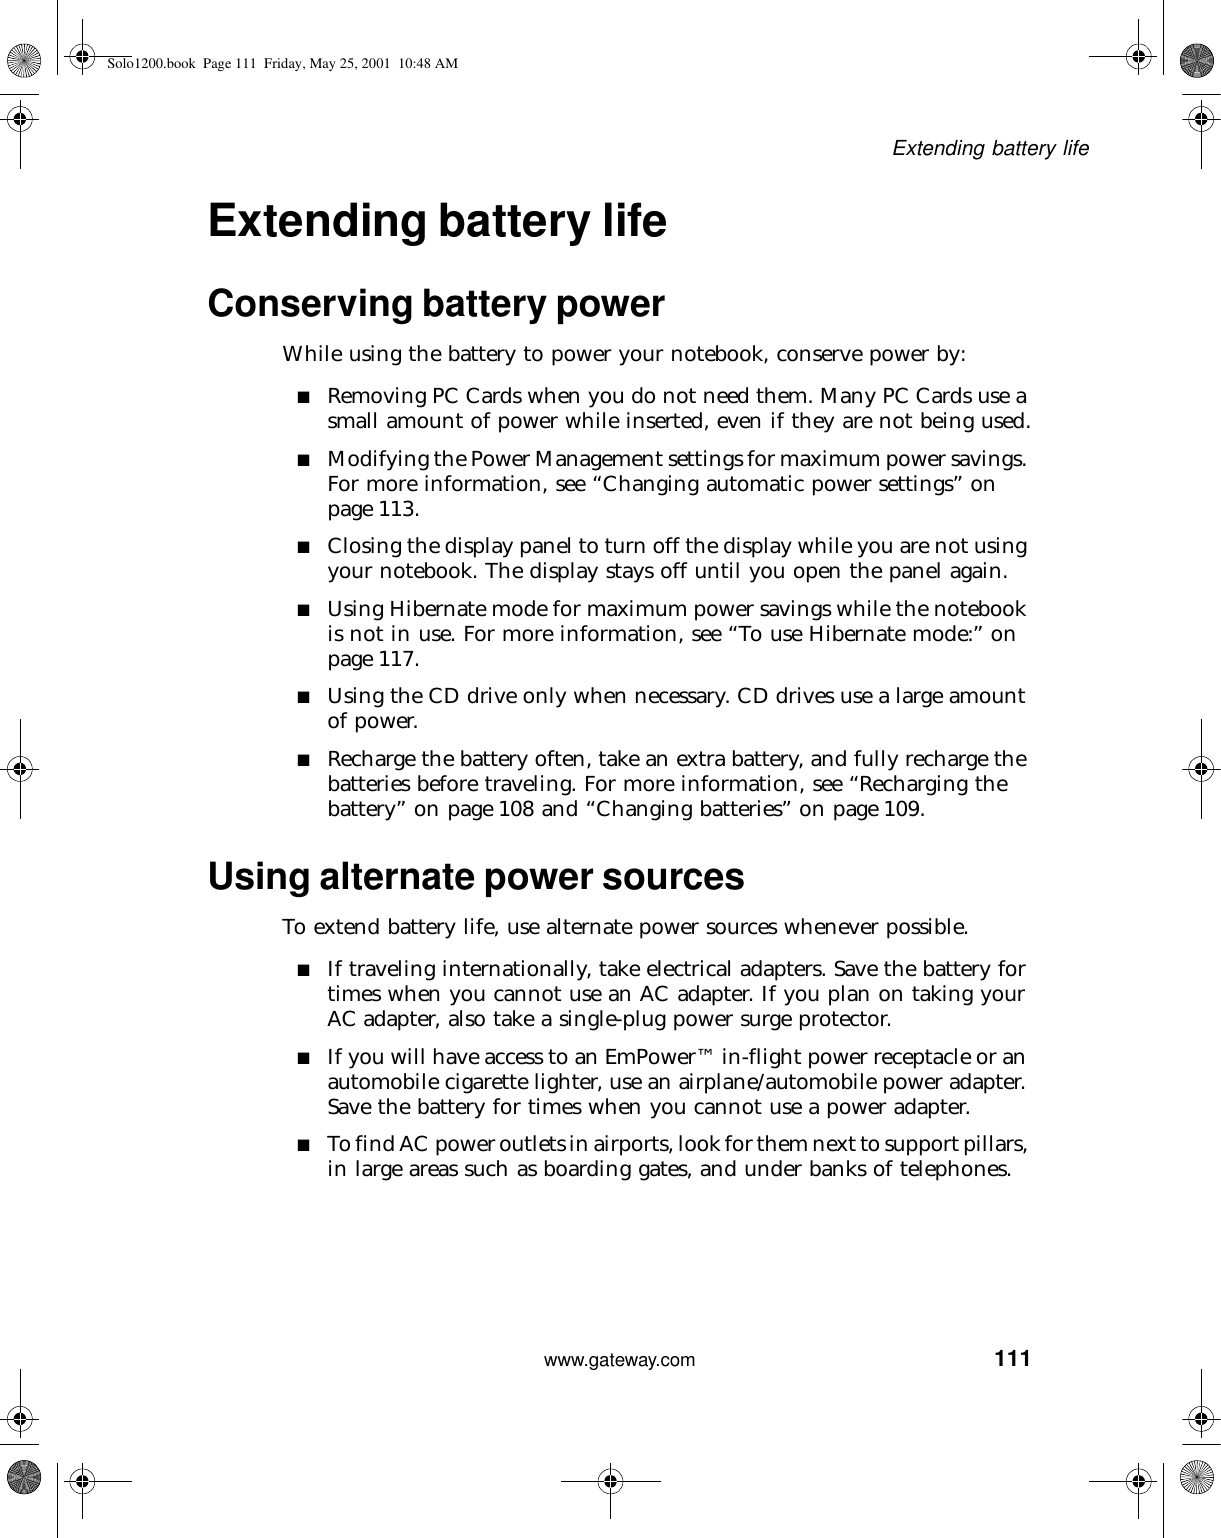 111Extending battery lifewww.gateway.comExtending battery lifeConserving battery powerWhile using the battery to power your notebook, conserve power by:■Removing PC Cards when you do not need them. Many PC Cards use a small amount of power while inserted, even if they are not being used.■Modifying the Power Management settings for maximum power savings. For more information, see “Changing automatic power settings” on page 113.■Closing the display panel to turn off the display while you are not using your notebook. The display stays off until you open the panel again.■Using Hibernate mode for maximum power savings while the notebook is not in use. For more information, see “To use Hibernate mode:” on page 117.■Using the CD drive only when necessary. CD drives use a large amount of power.■Recharge the battery often, take an extra battery, and fully recharge the batteries before traveling. For more information, see “Recharging the battery” on page 108 and “Changing batteries” on page 109.Using alternate power sourcesTo extend battery life, use alternate power sources whenever possible.■If traveling internationally, take electrical adapters. Save the battery for times when you cannot use an AC adapter. If you plan on taking your AC adapter, also take a single-plug power surge protector.■If you will have access to an EmPower™ in-flight power receptacle or an automobile cigarette lighter, use an airplane/automobile power adapter. Save the battery for times when you cannot use a power adapter.■To find AC power outlets in airports, look for them next to support pillars, in large areas such as boarding gates, and under banks of telephones.Solo1200.book Page 111 Friday, May 25, 2001 10:48 AM